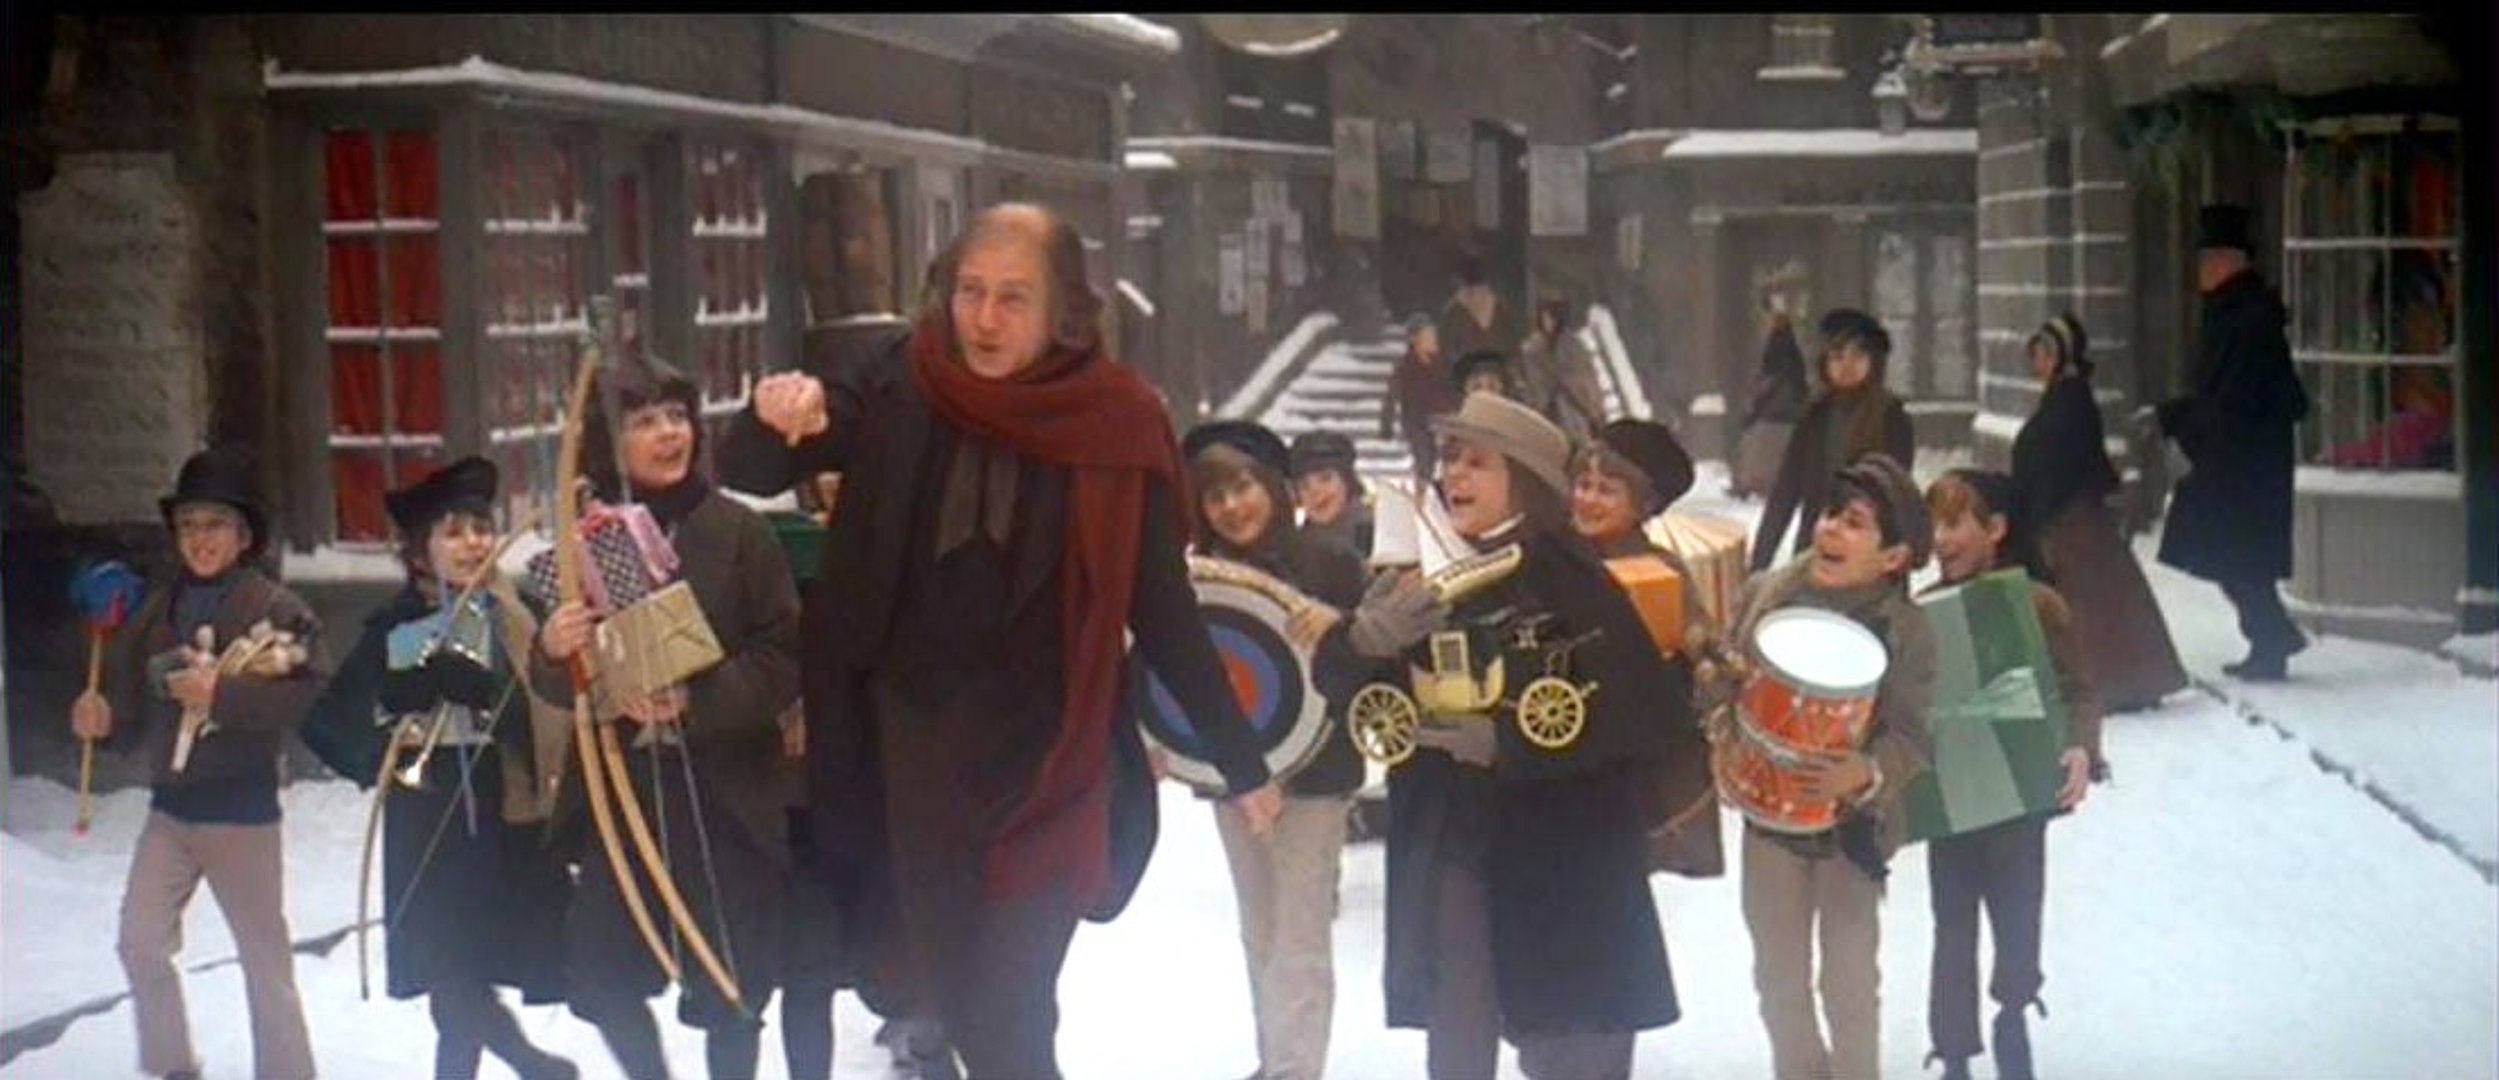 Still from the 1970 film. Scrooge happily leads a group of children down a snowy street.